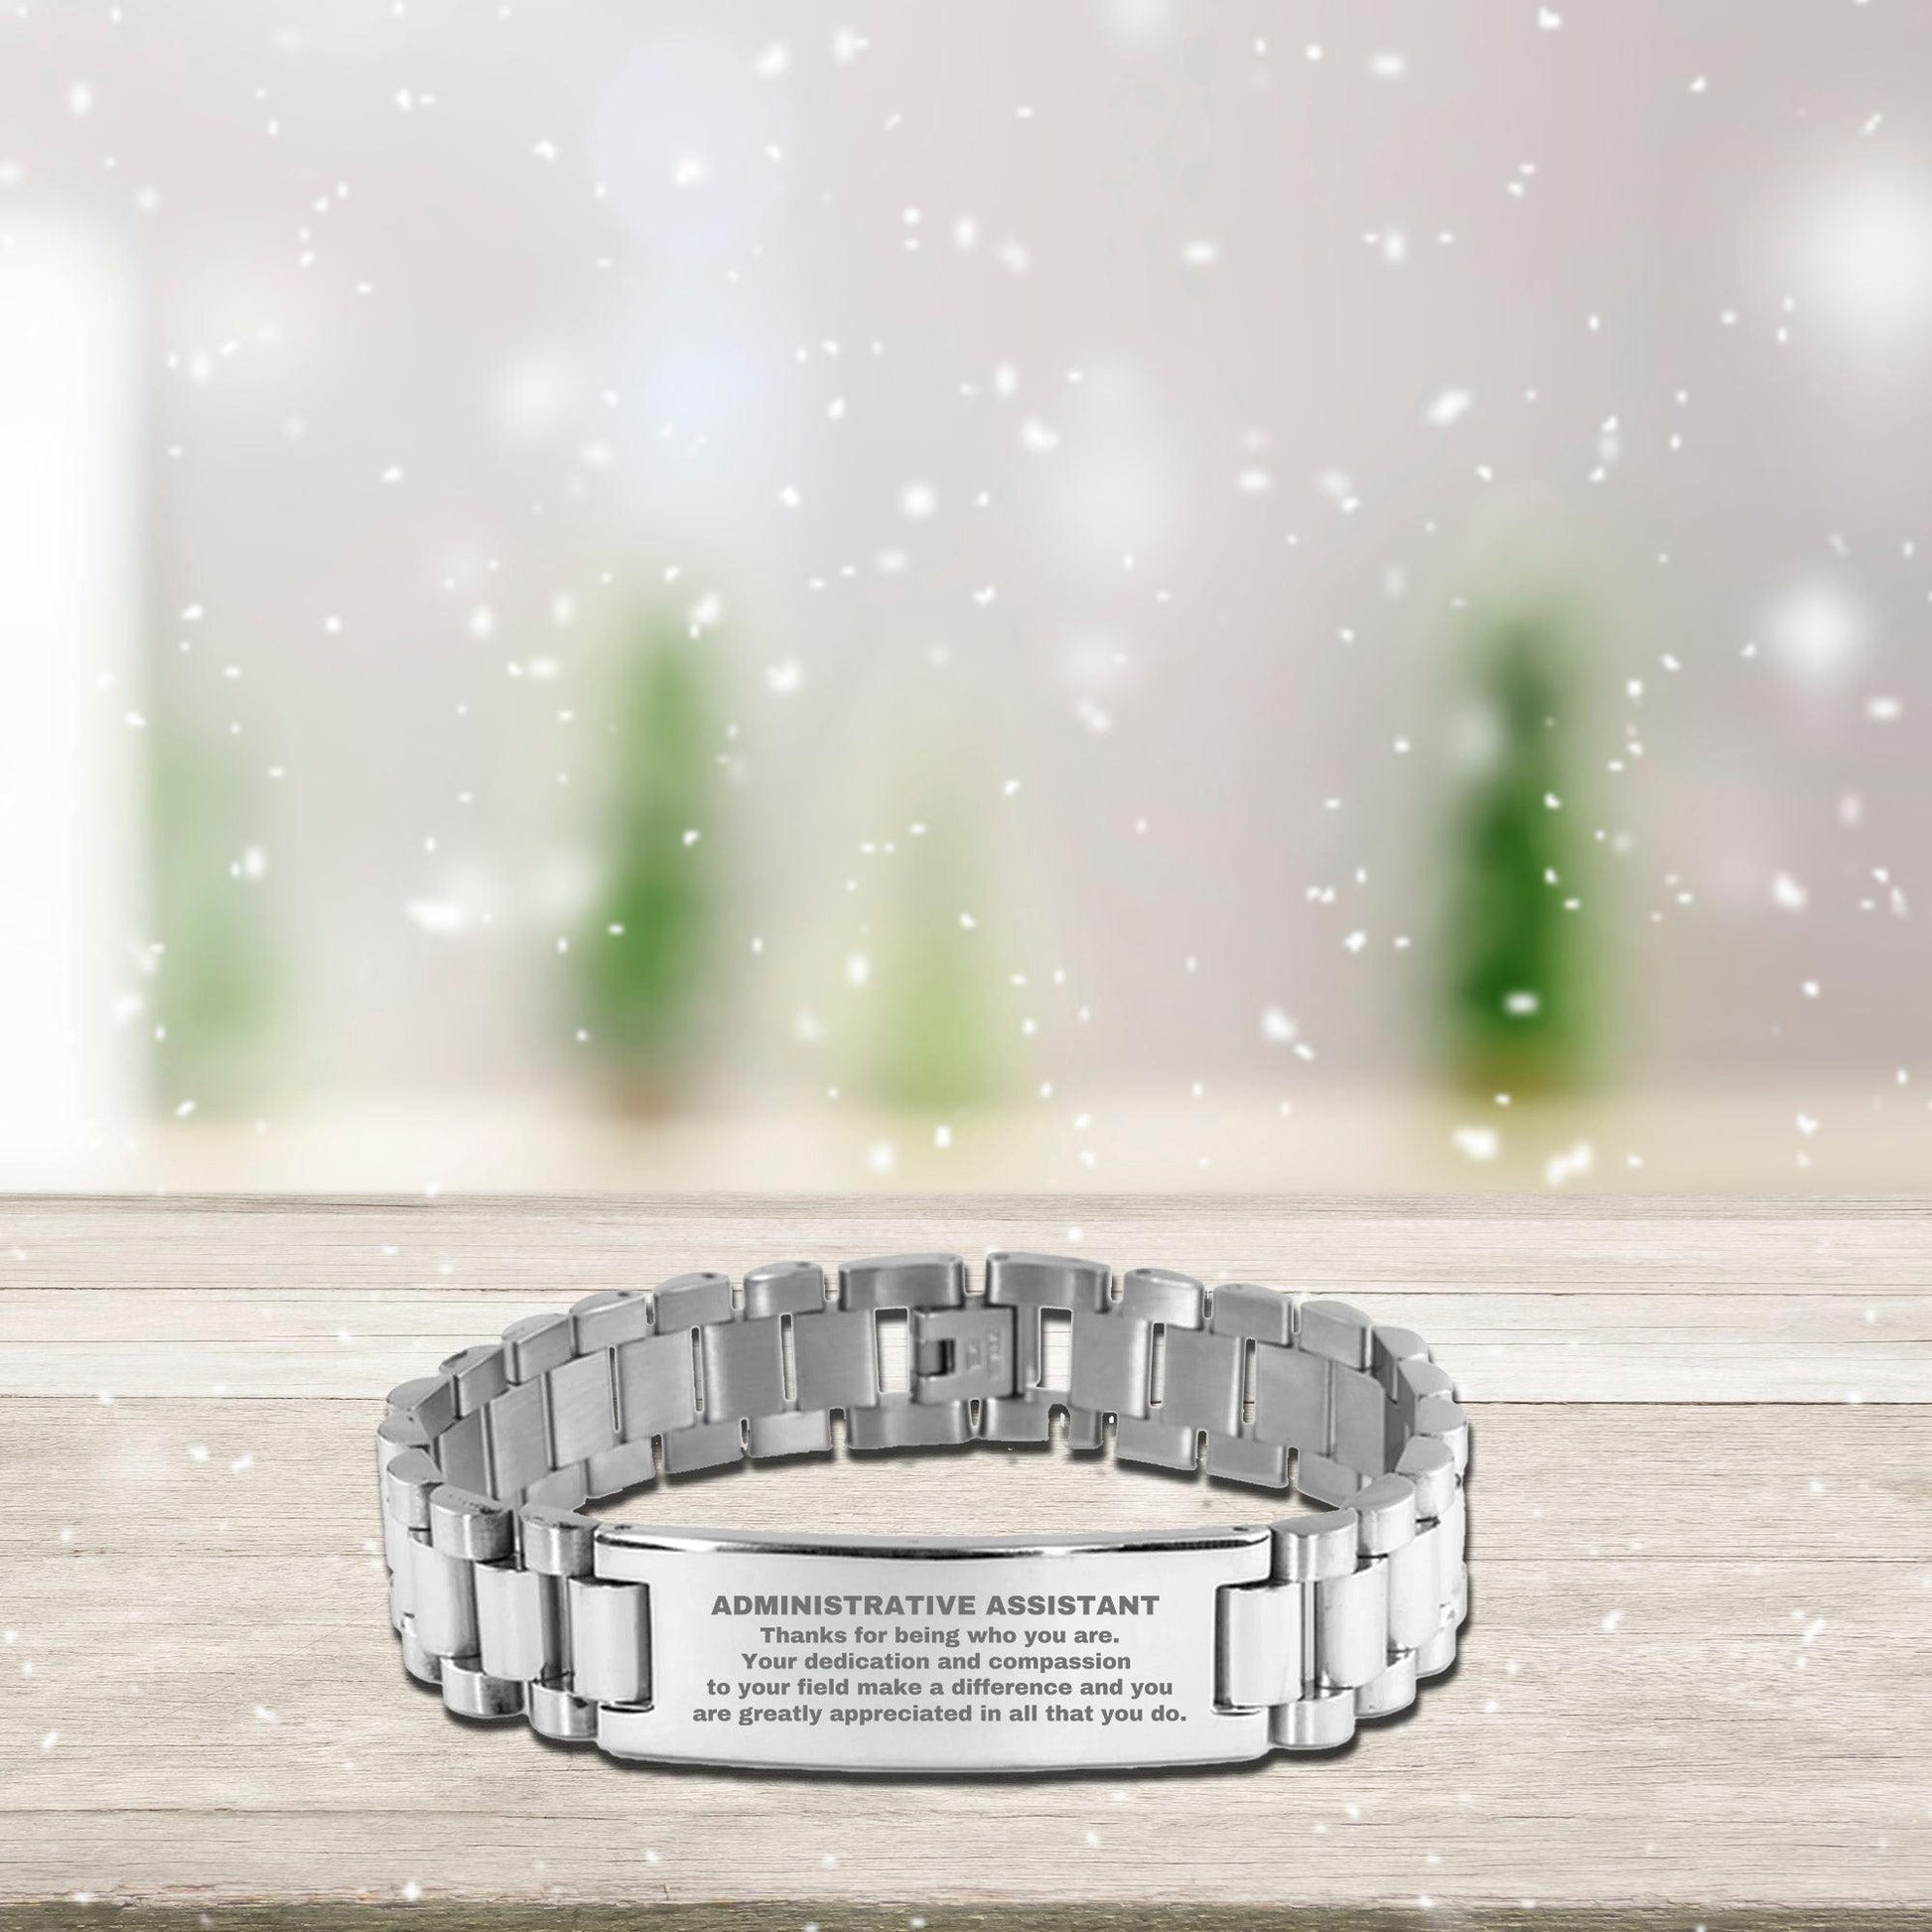 Administrative Assistant Ladder Stainless Steel Engraved Bracelet - Thanks for being who you are - Birthday Christmas Jewelry Gifts Coworkers Colleague Boss - Mallard Moon Gift Shop